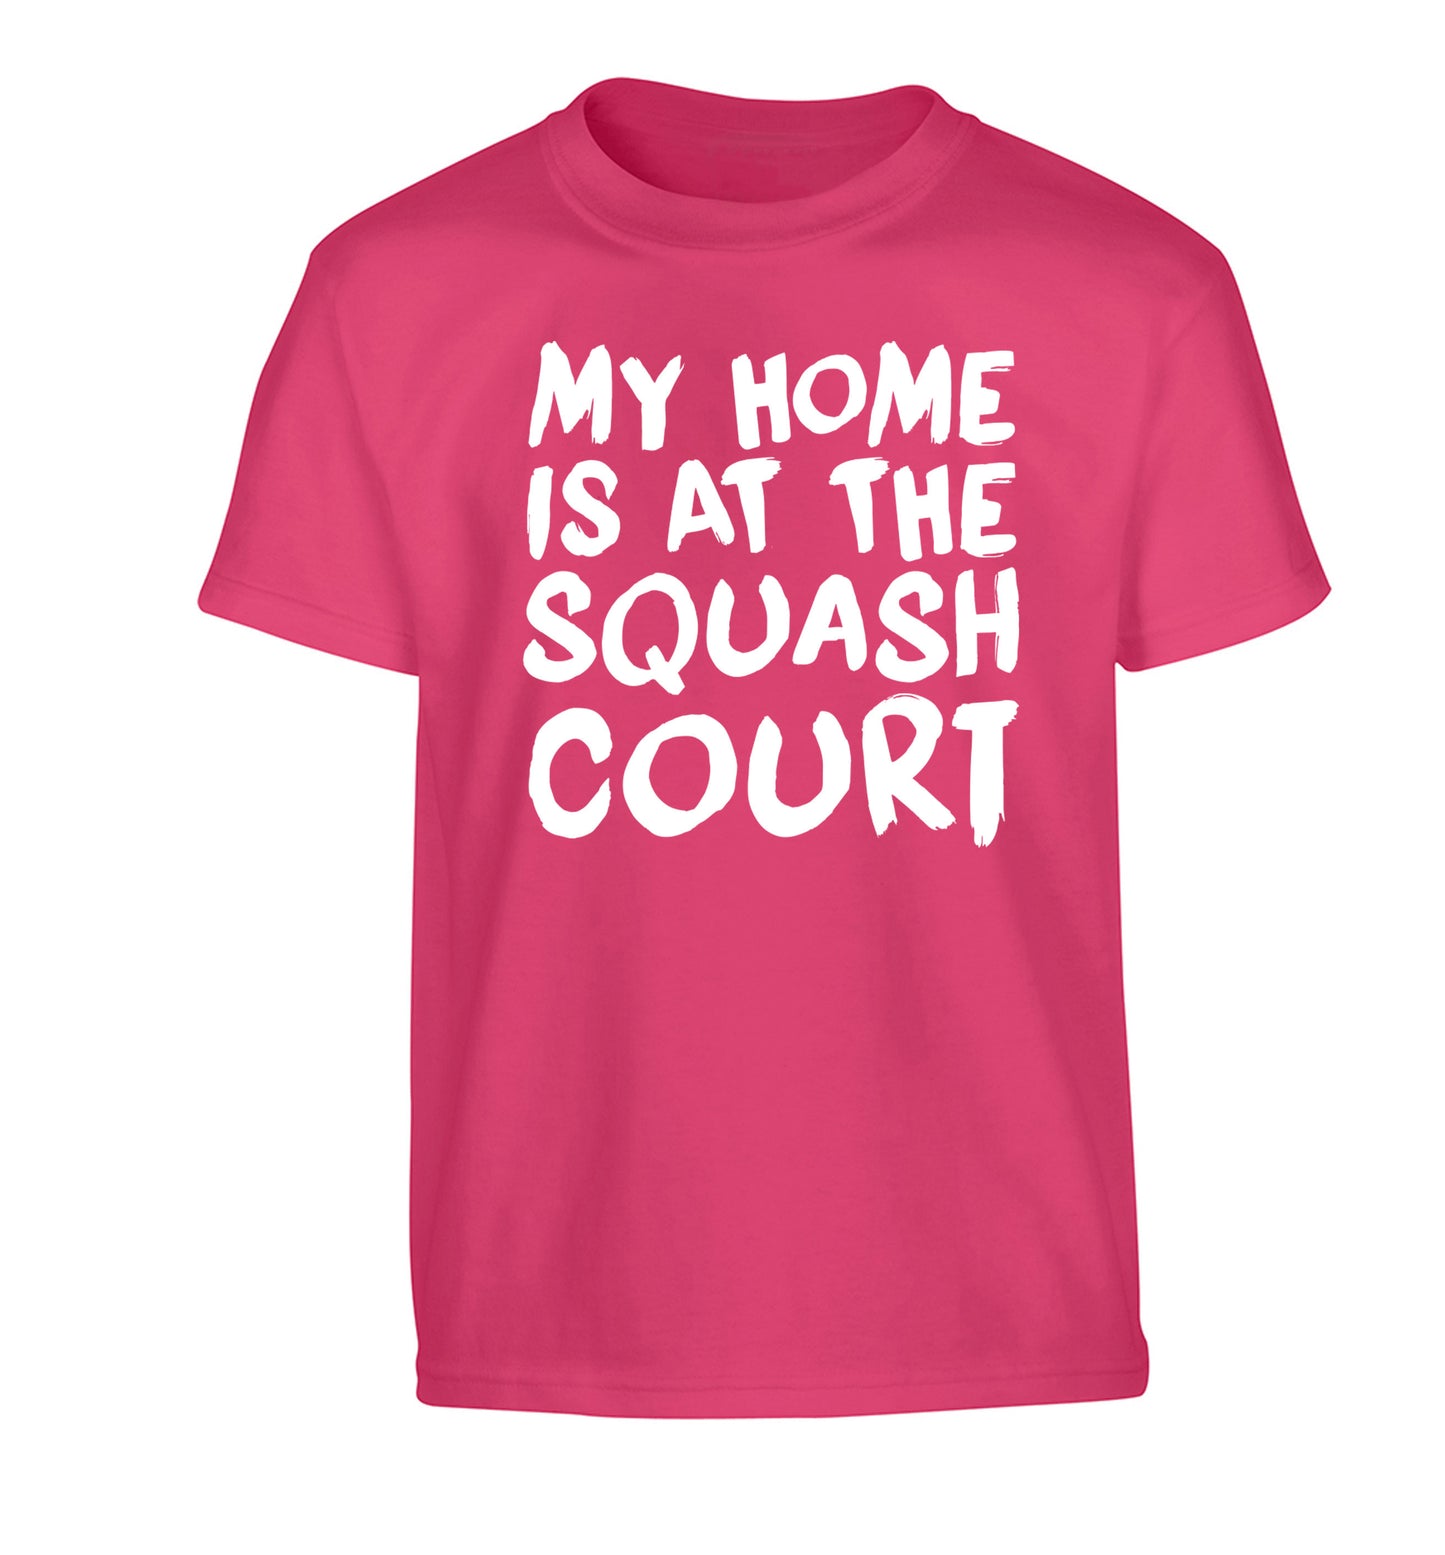 My home is at the squash court Children's pink Tshirt 12-14 Years